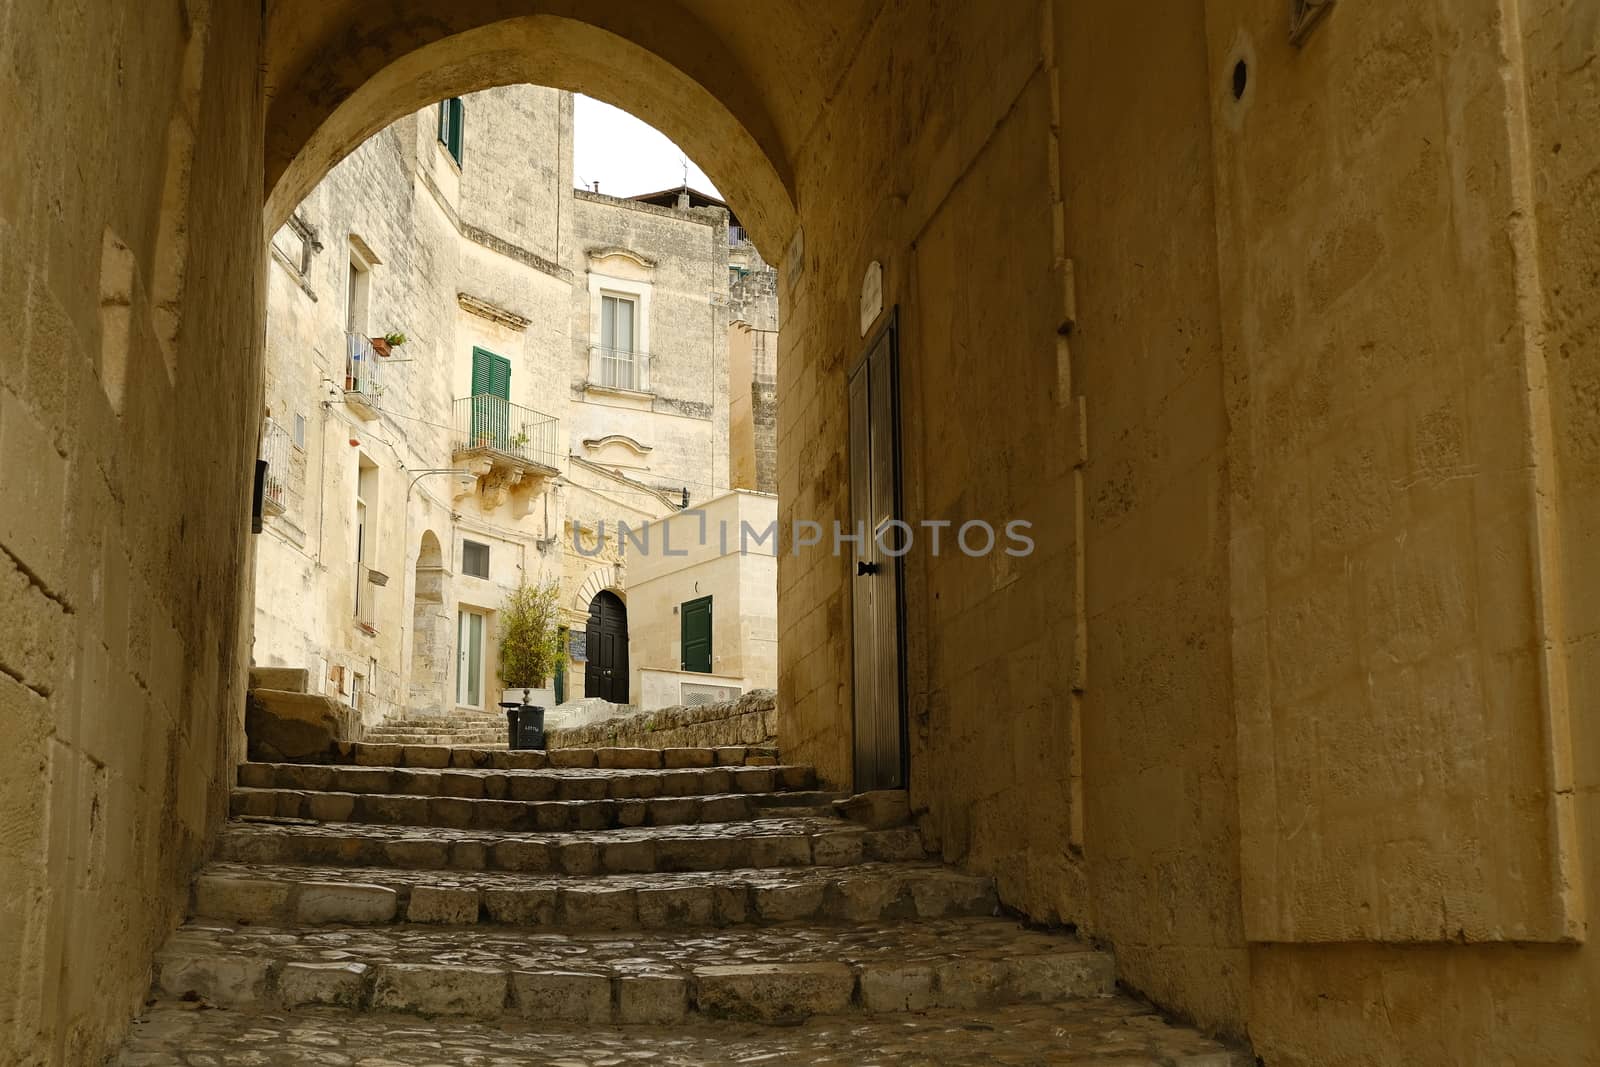 Matera, Basilicata, Italy. About 11/2019. Road in the ancient city of Matera. Paving with beige stone and covering with arch and vault.